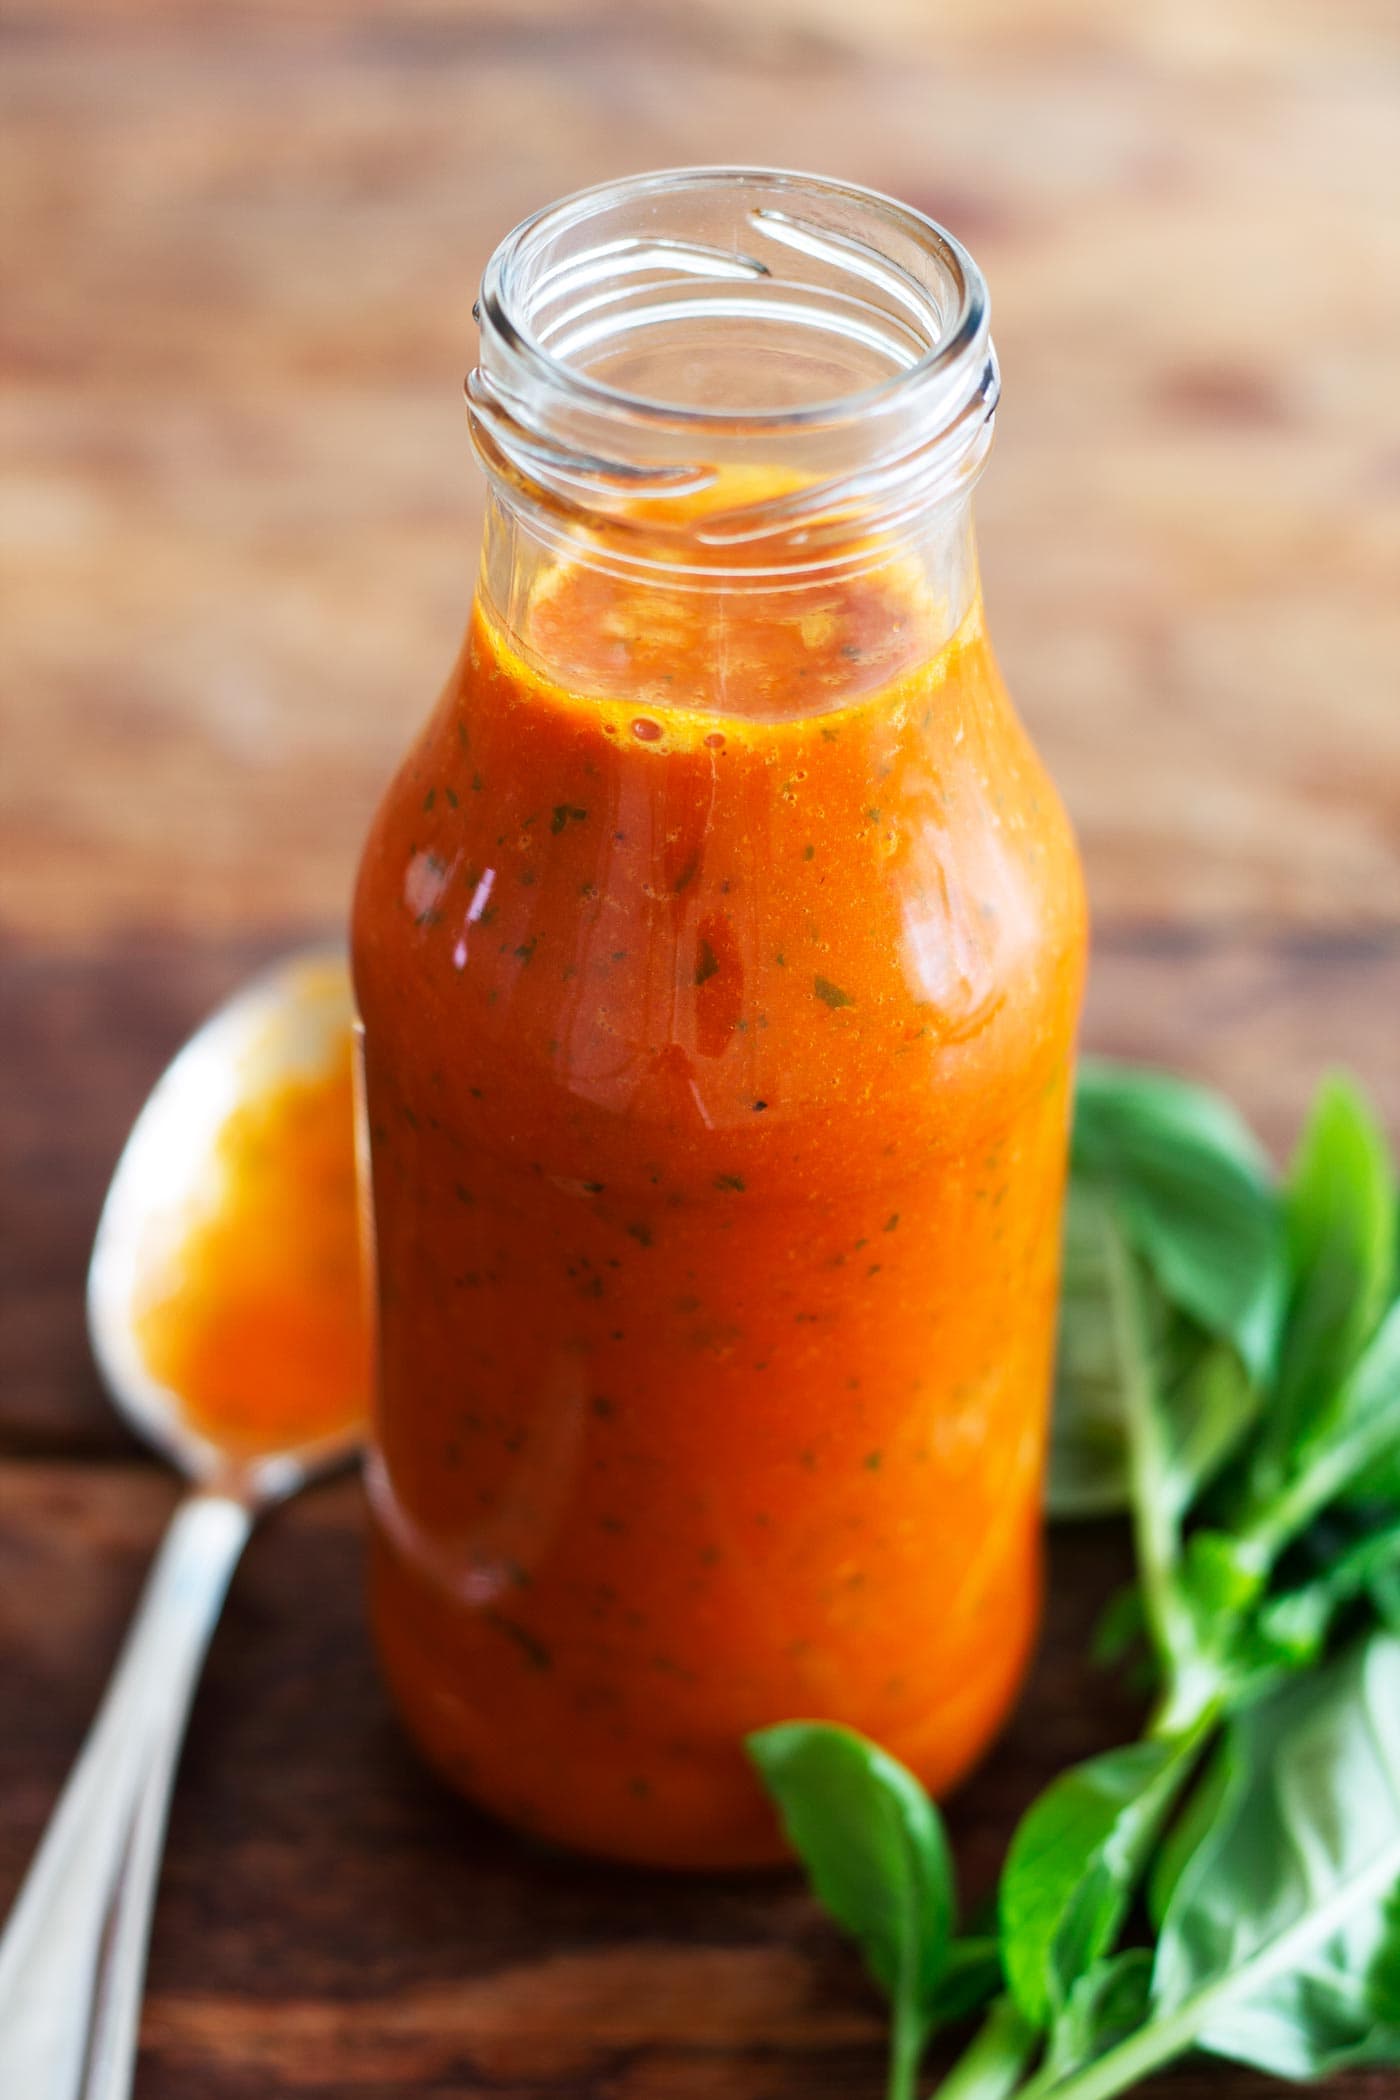 A naturally sweet, healthy salad dressing that is easy to make in less than 30 mins. This recipe is paleo, vegan, Whole30, dairy free, and low carb/keto!